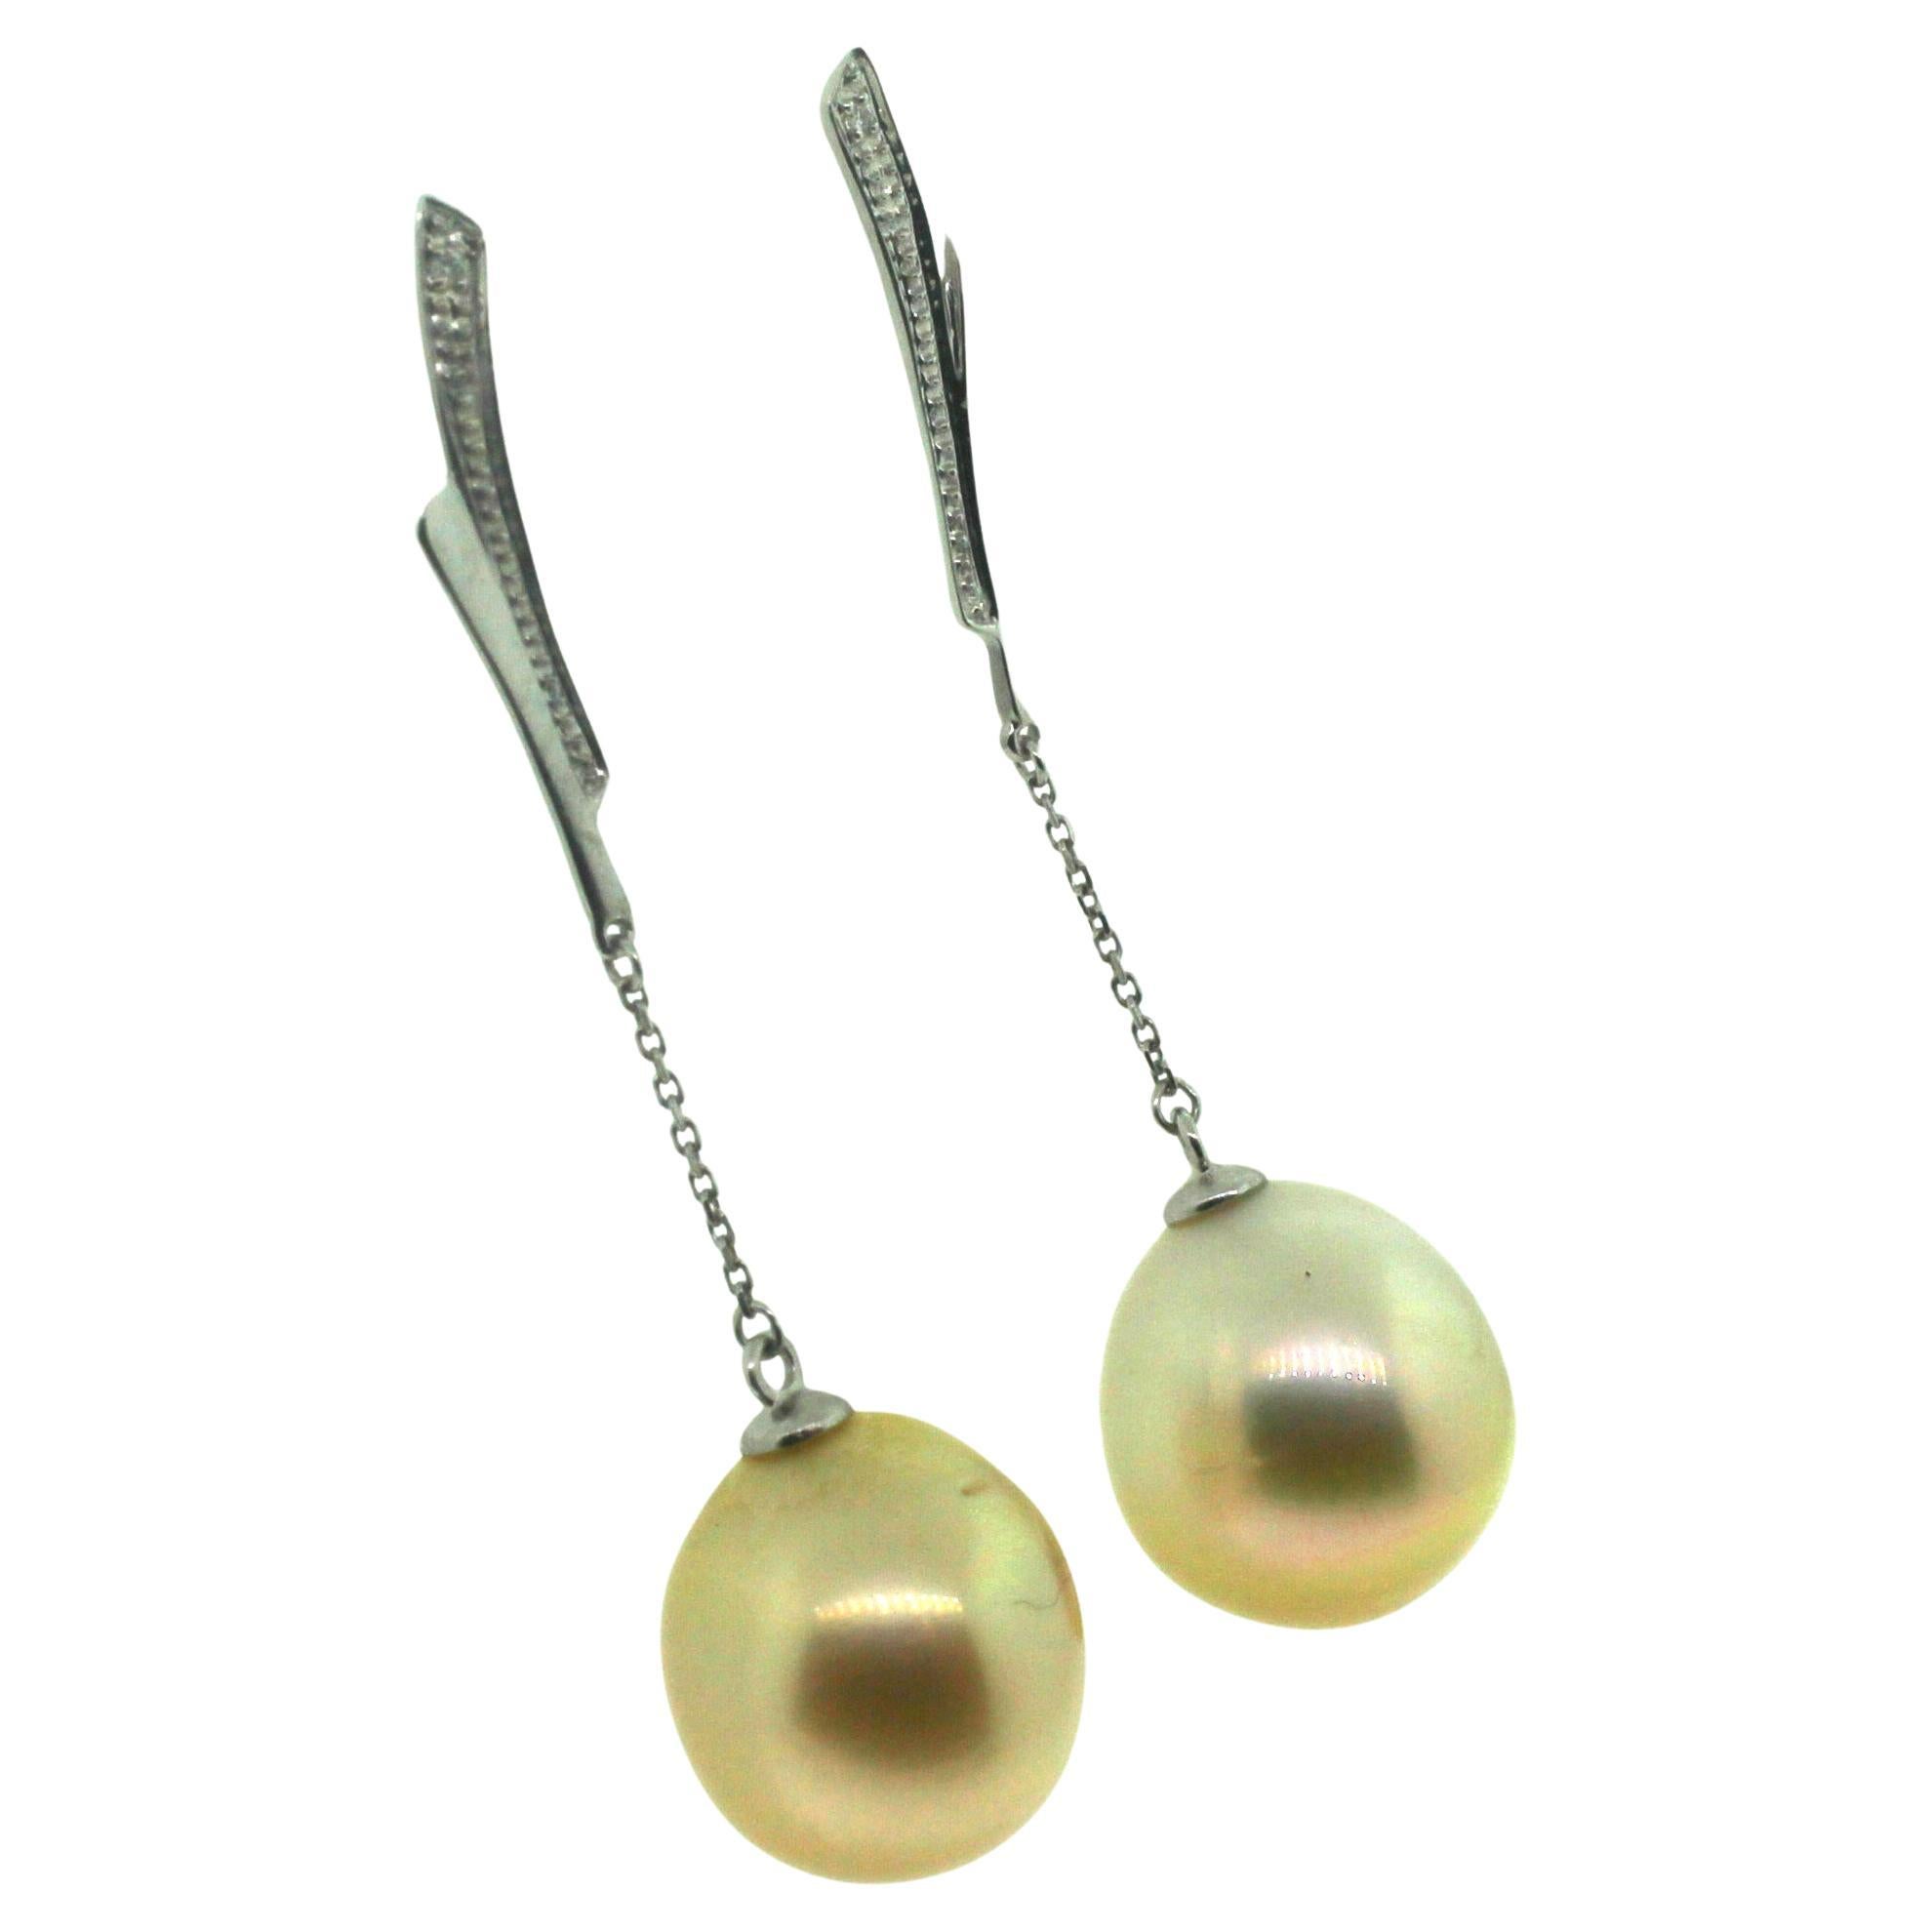 Hakimoto By Jewel Of Ocean
18K Yellow Gold and Diamond 
Natural Color South Sea Cultured Pearl Earrings.
Total item weight 7 grams
Featuring Round Brilliant Diamonds
14-13mm South Sea Cultured Pearls
18K Yellow Gold High Polish
Orient: Very